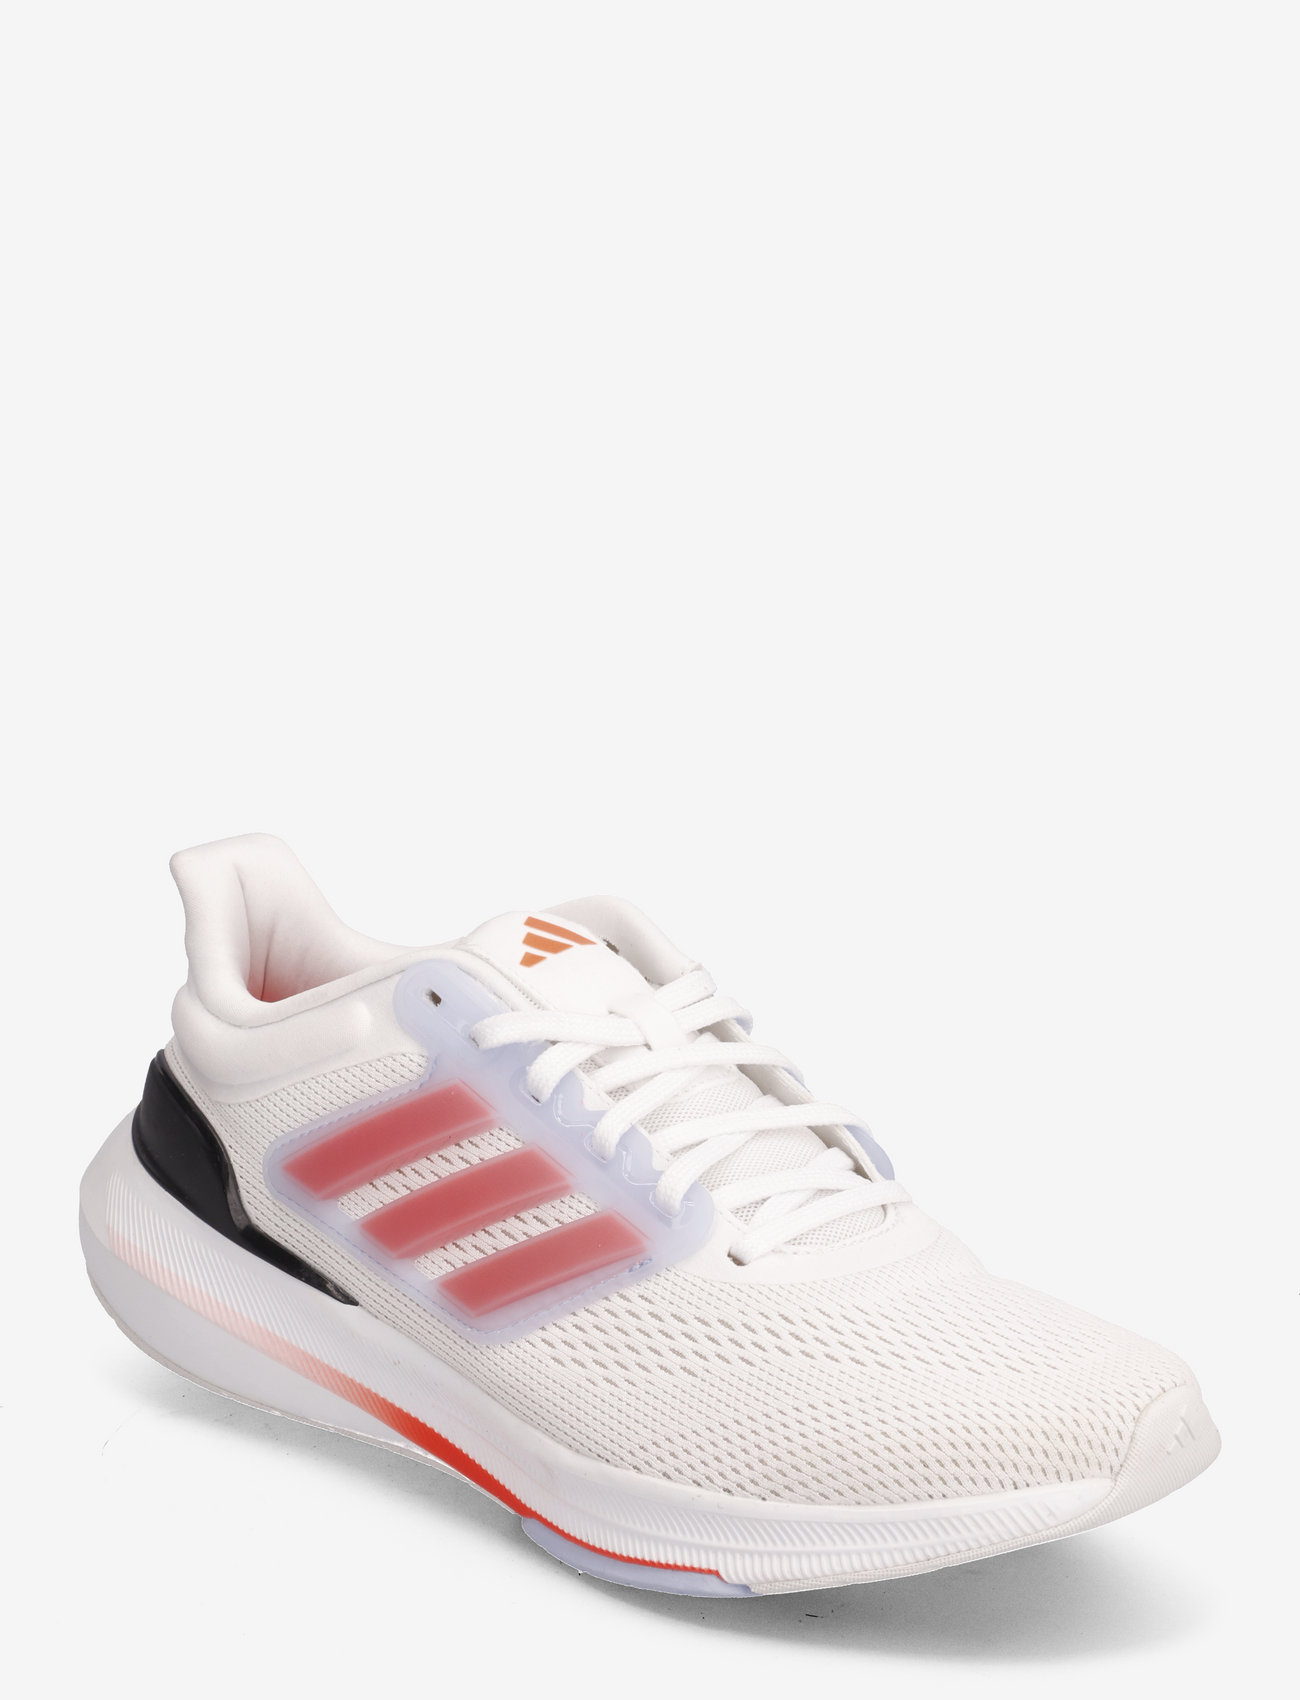 adidas Performance - Ultrabounce Shoes - loopschoenen - ftwwht/solred/crywht - 1